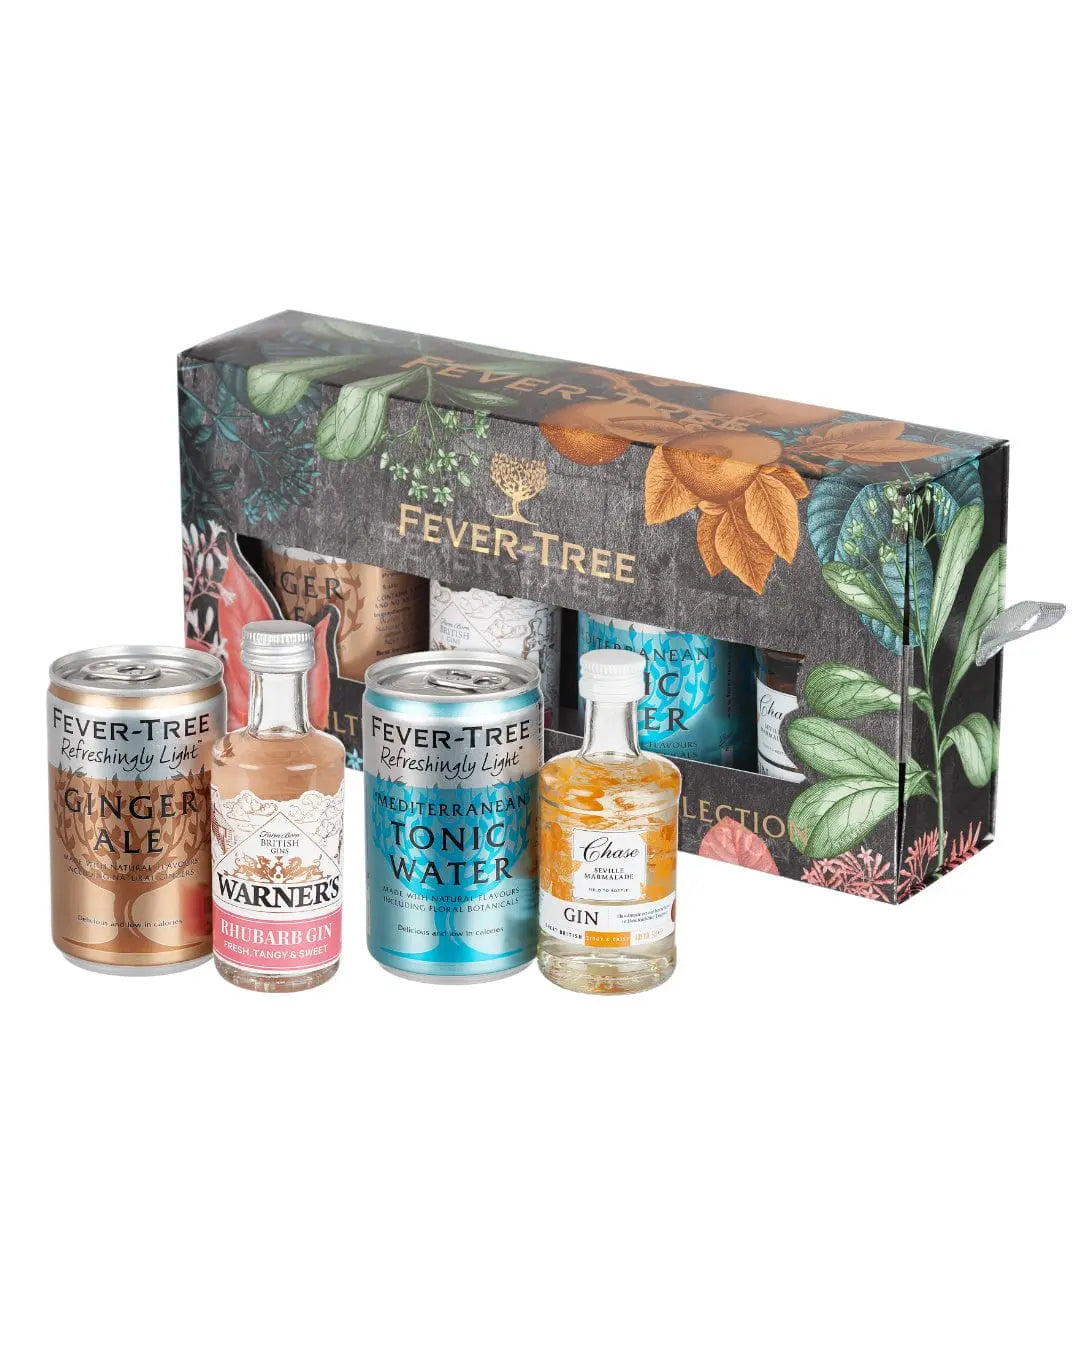 The Ultimate Fever-Tree 2 Serve Gin & Mixer Selection Ready Made Cocktails